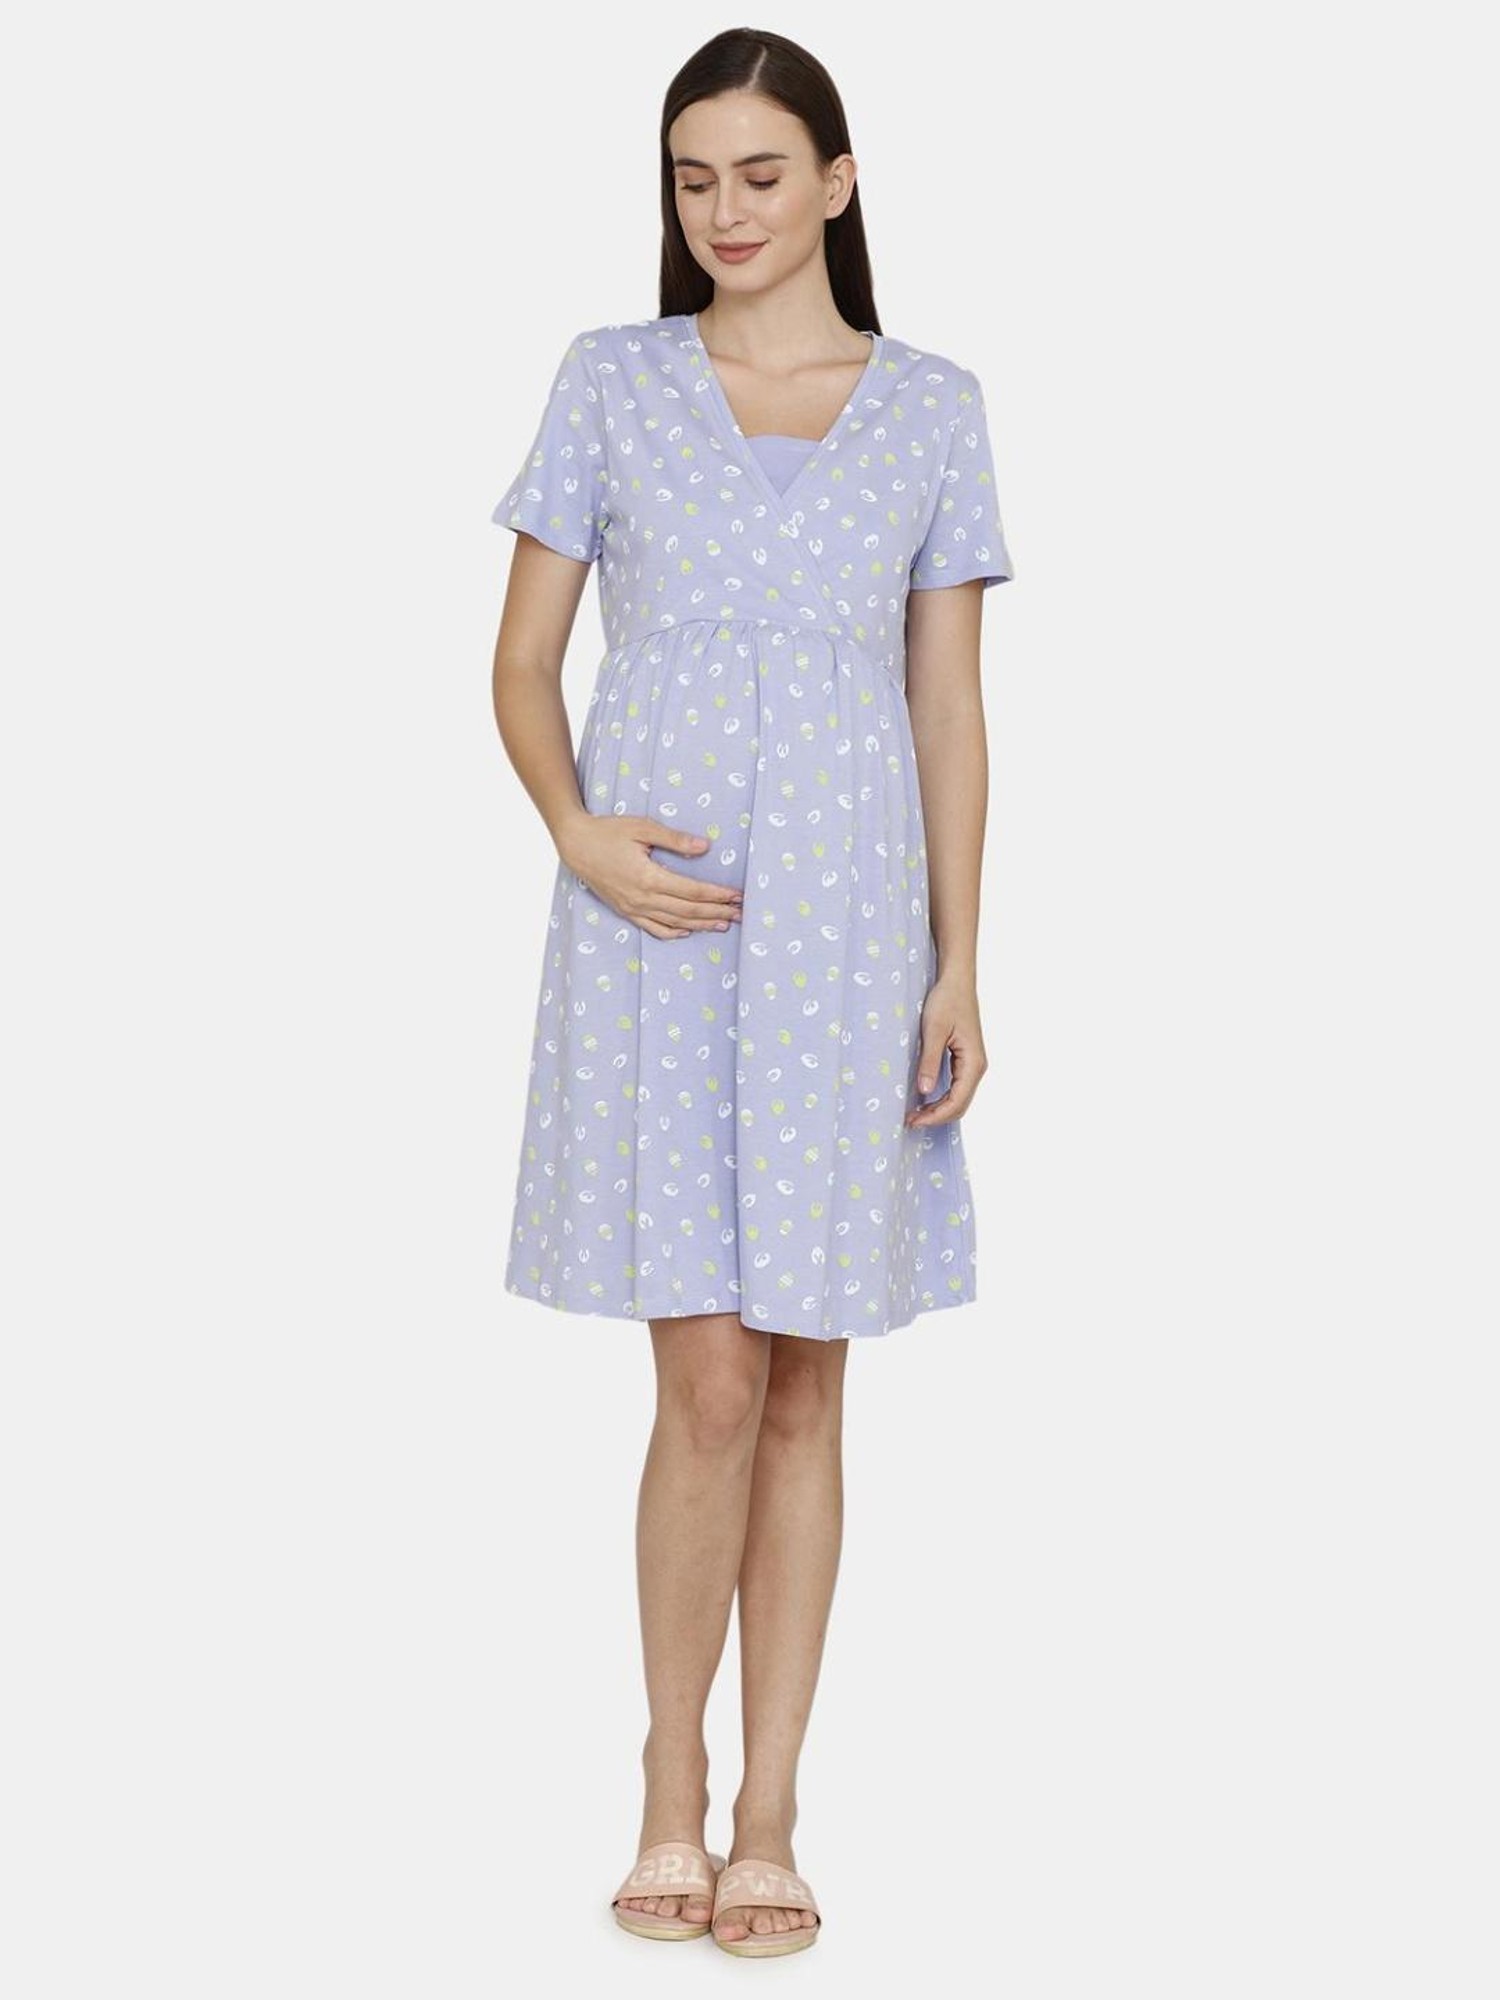 Coucou by Zivame Women Maternity/Nursing Nighty - Buy Coucou by